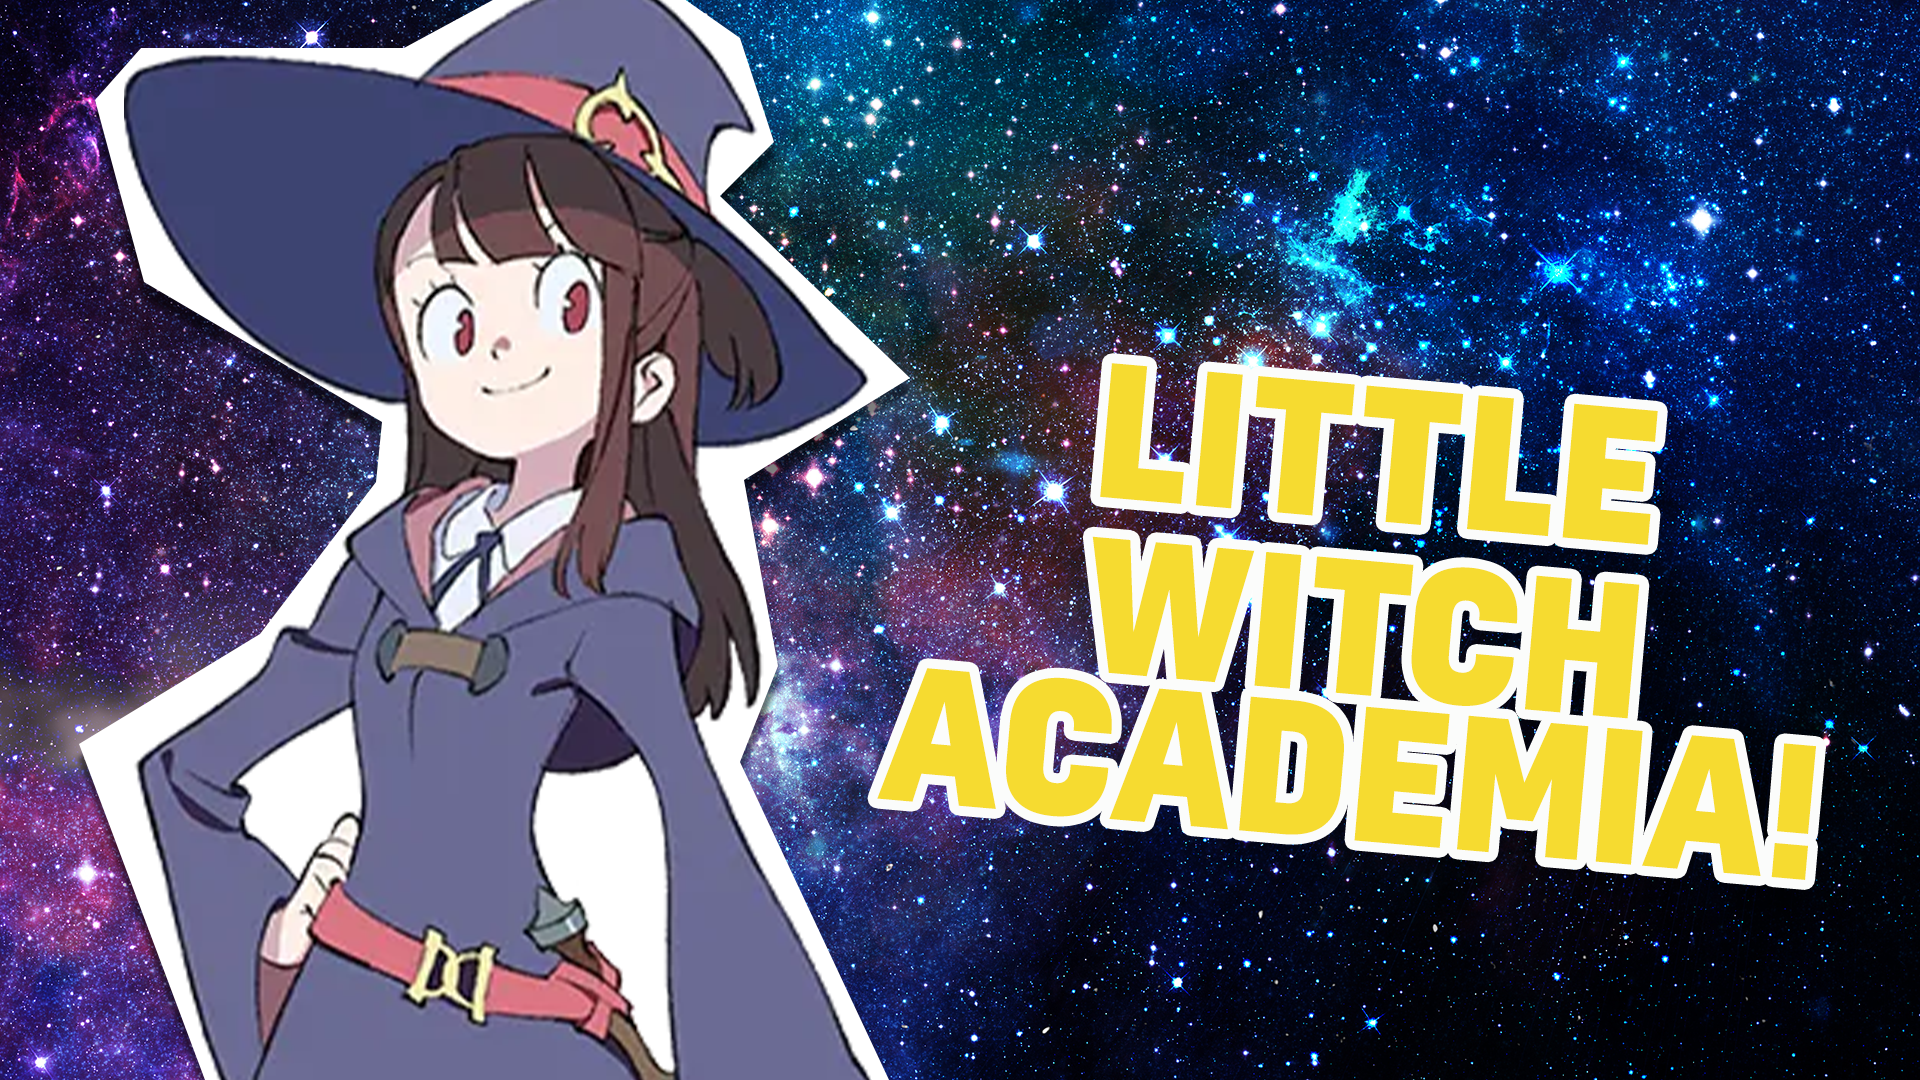 You should watch Little Witch Academia! If you love Harry Potter and Wednesday, you'll enjoy this cool show all about a young witch learning magic and getting into trouble!